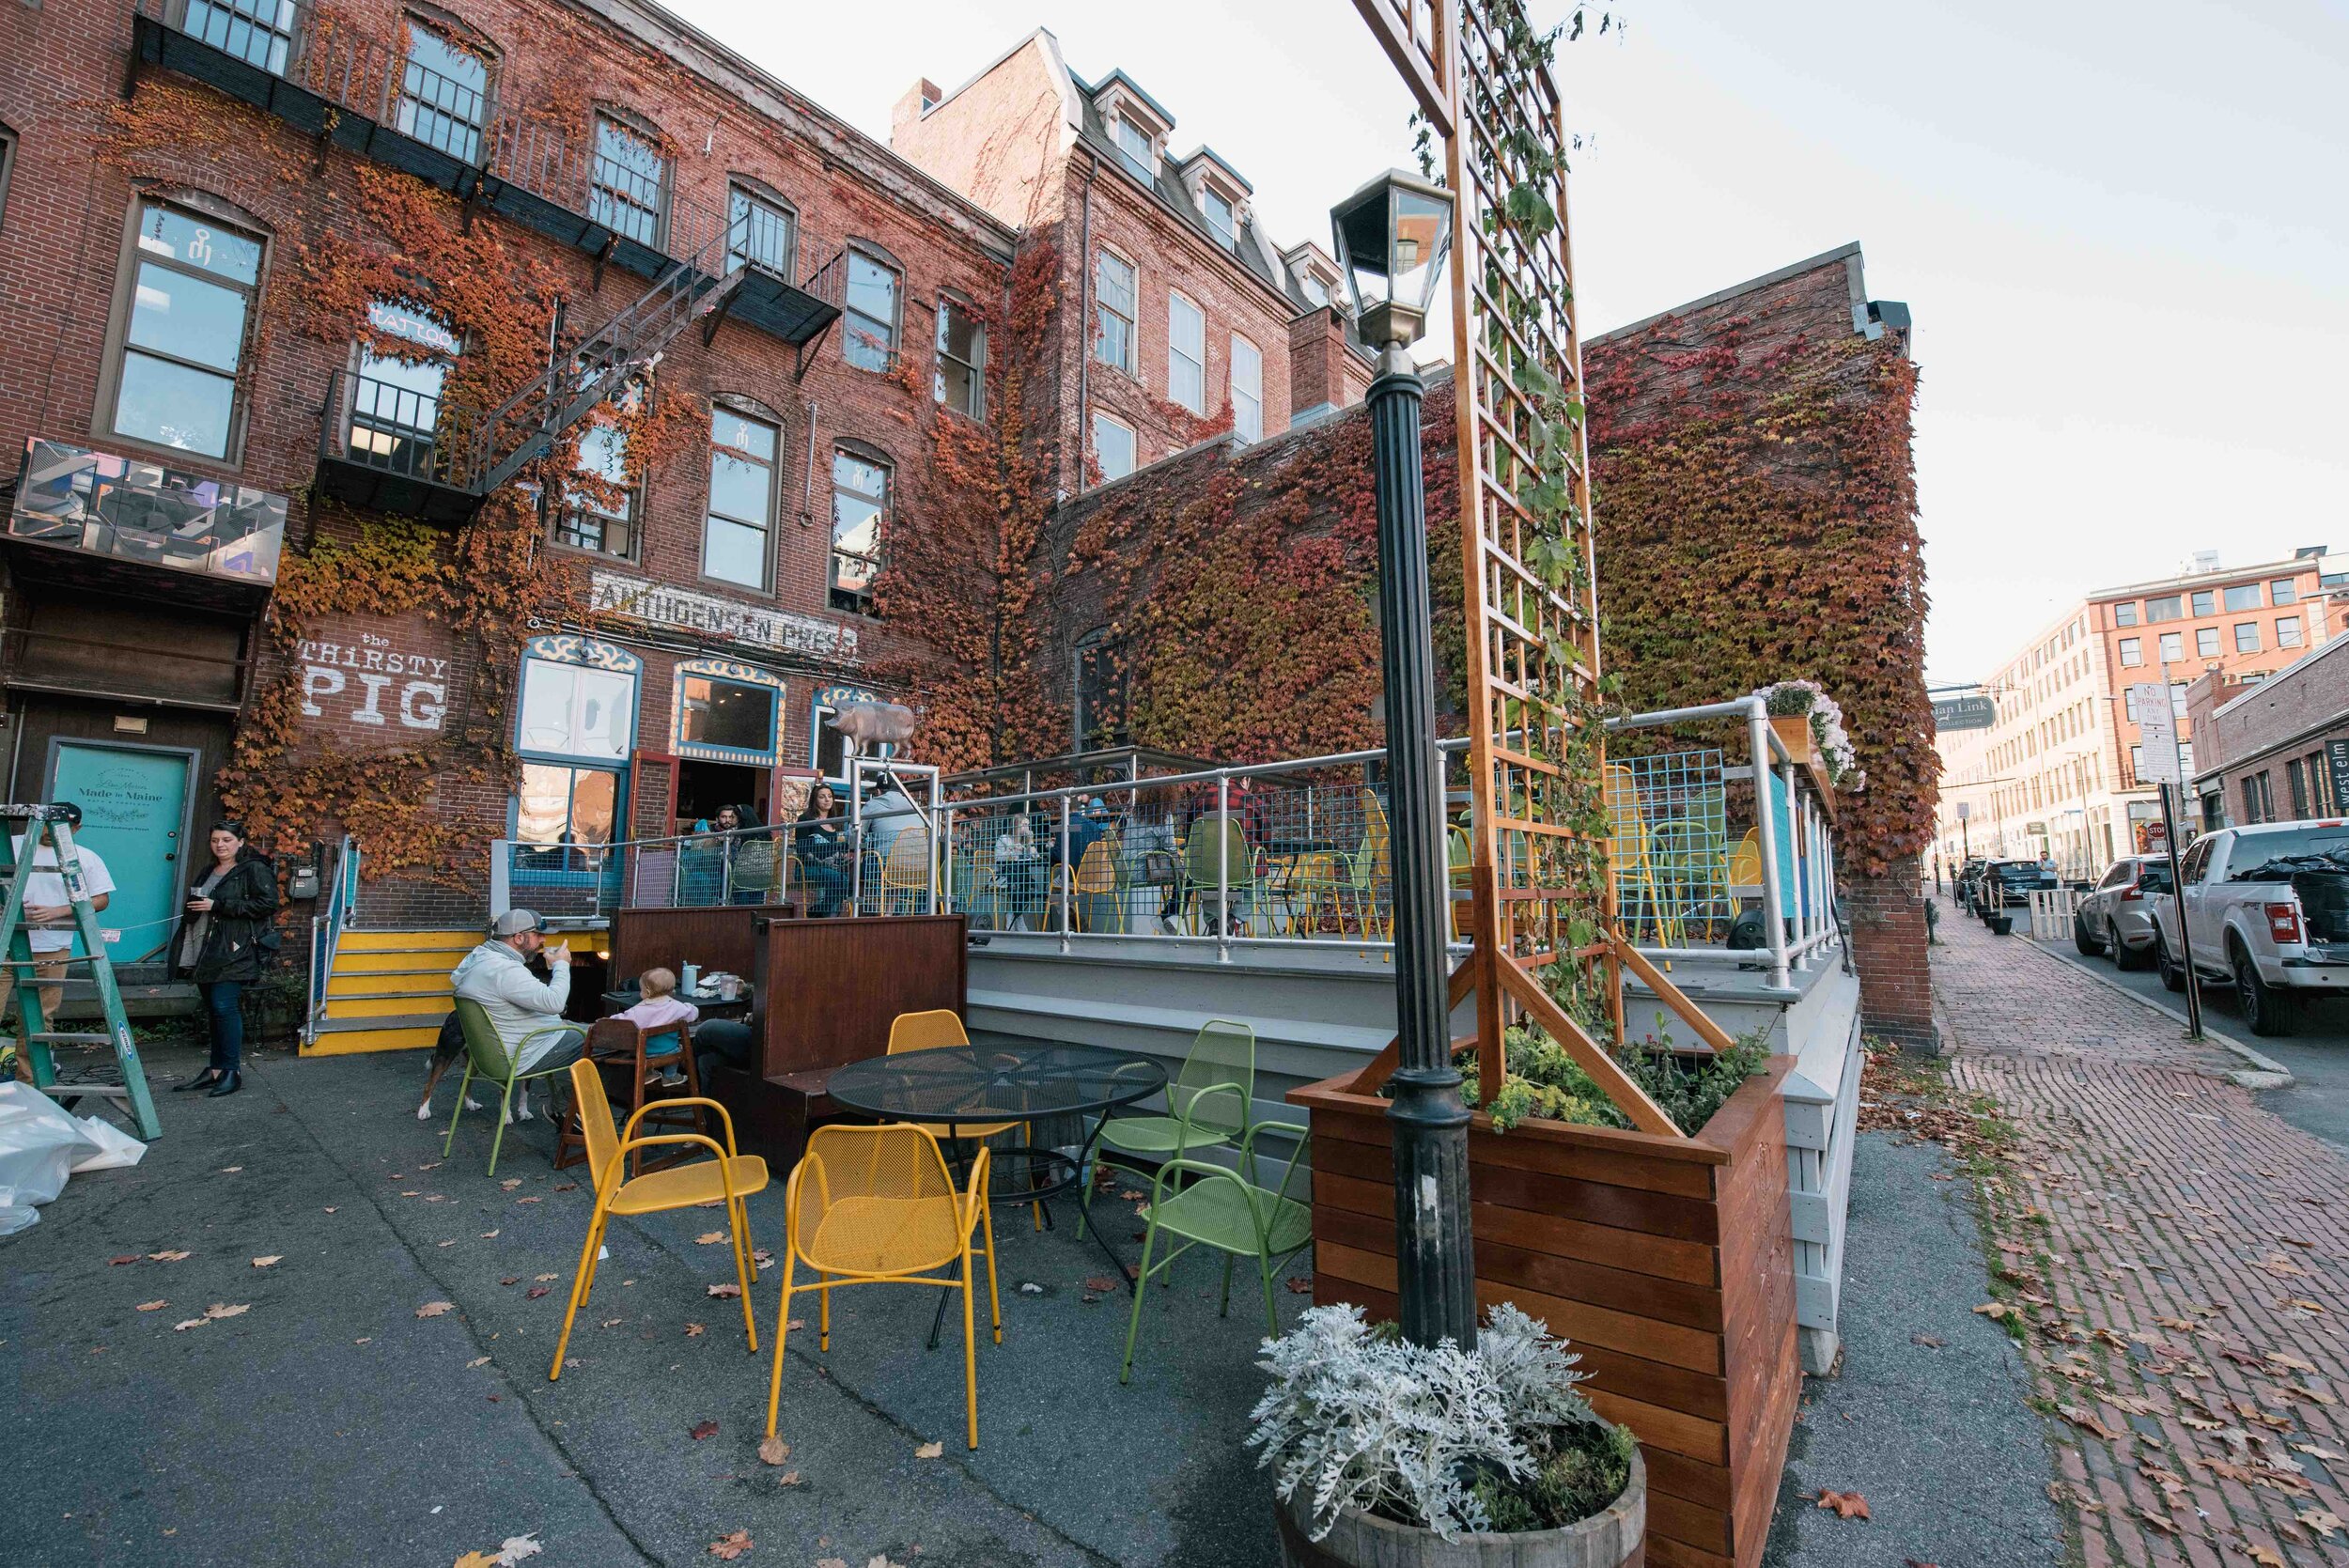  “We’ve seen an increase in outdoor dining,” says Cary. “It adds to the vibrancy of the street life.” 